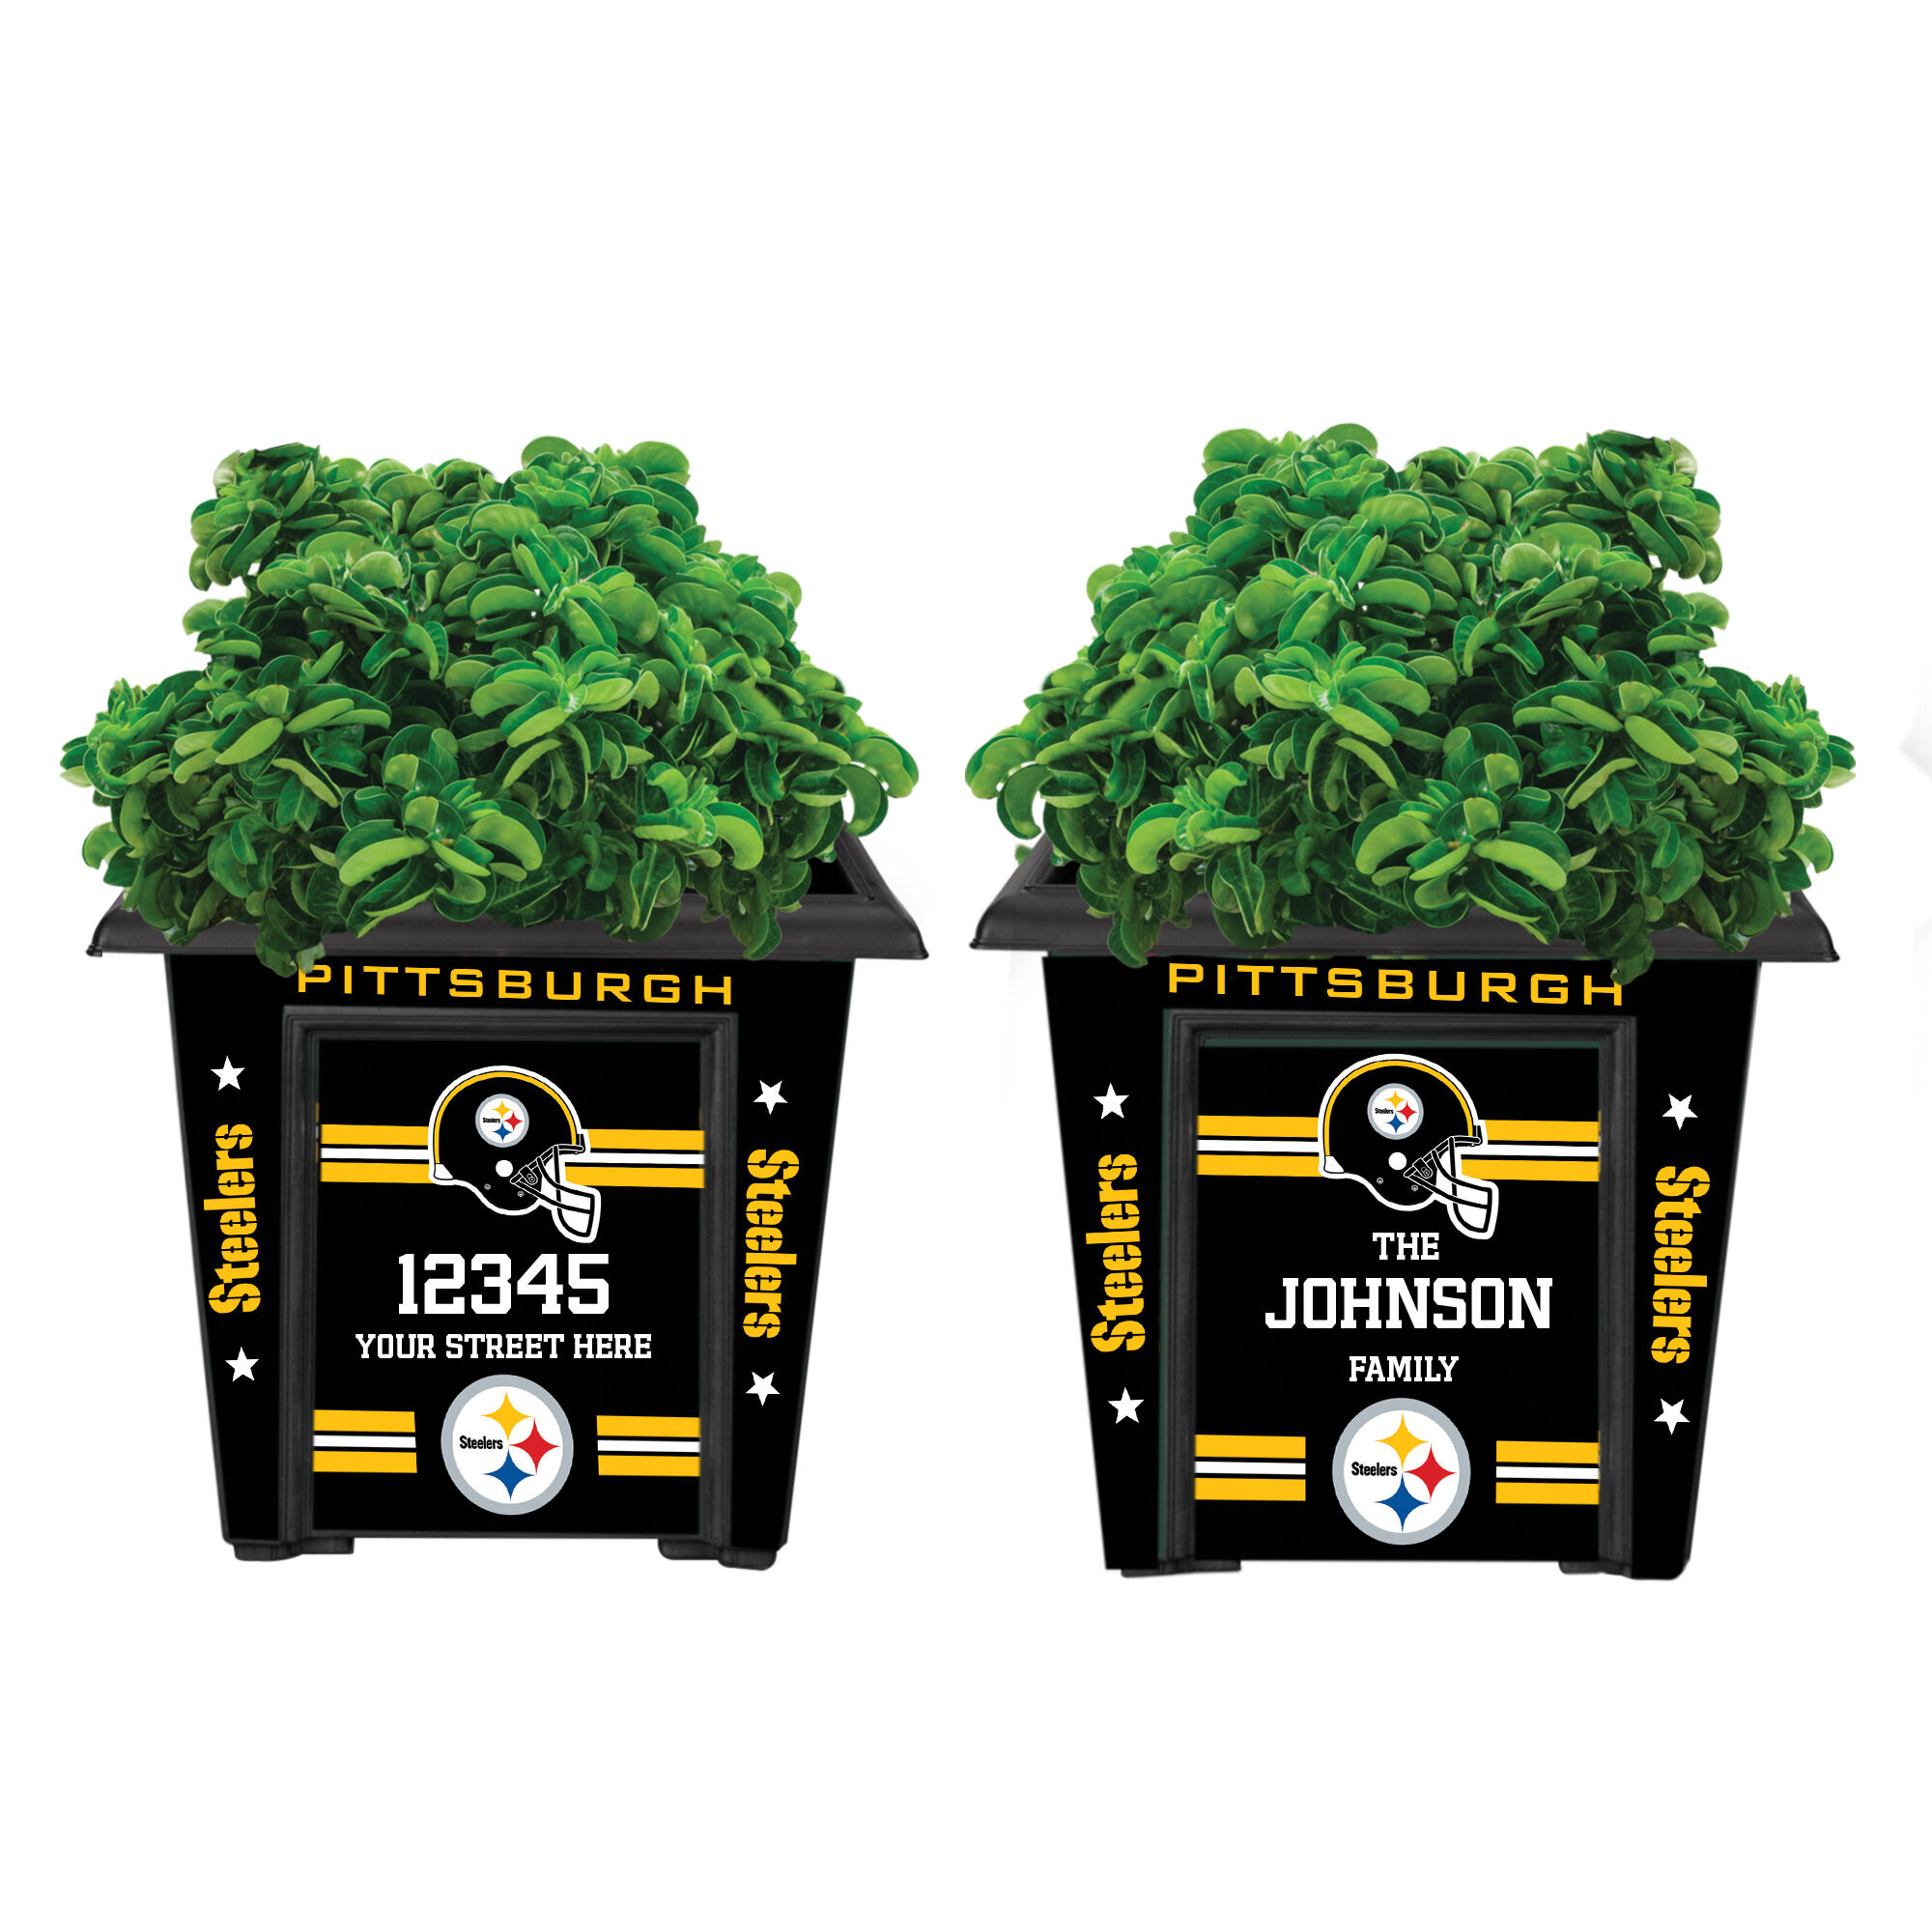 The NFL Personalized Planters 1929 0048 a steelers